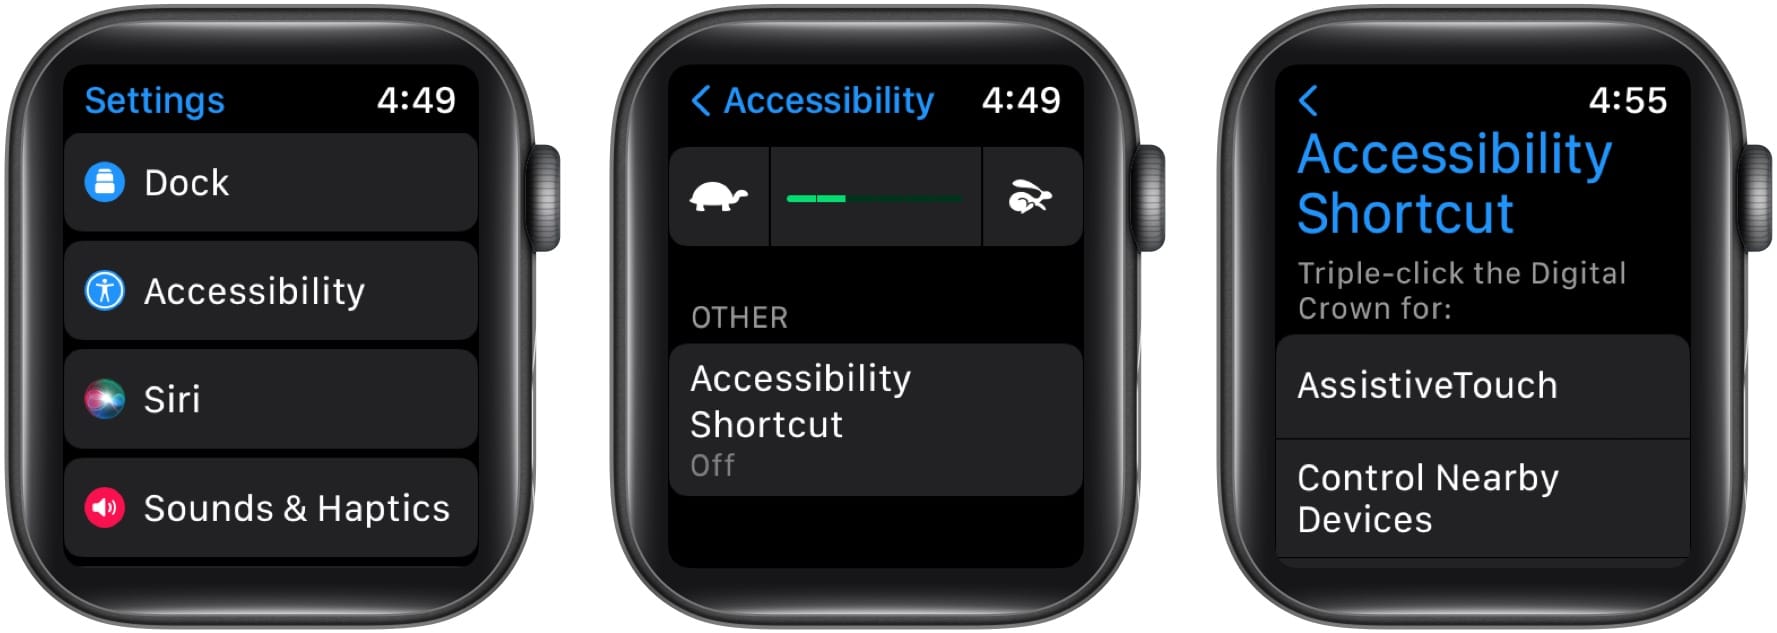 turning on Accessibility Shortcut on an Apple Watch